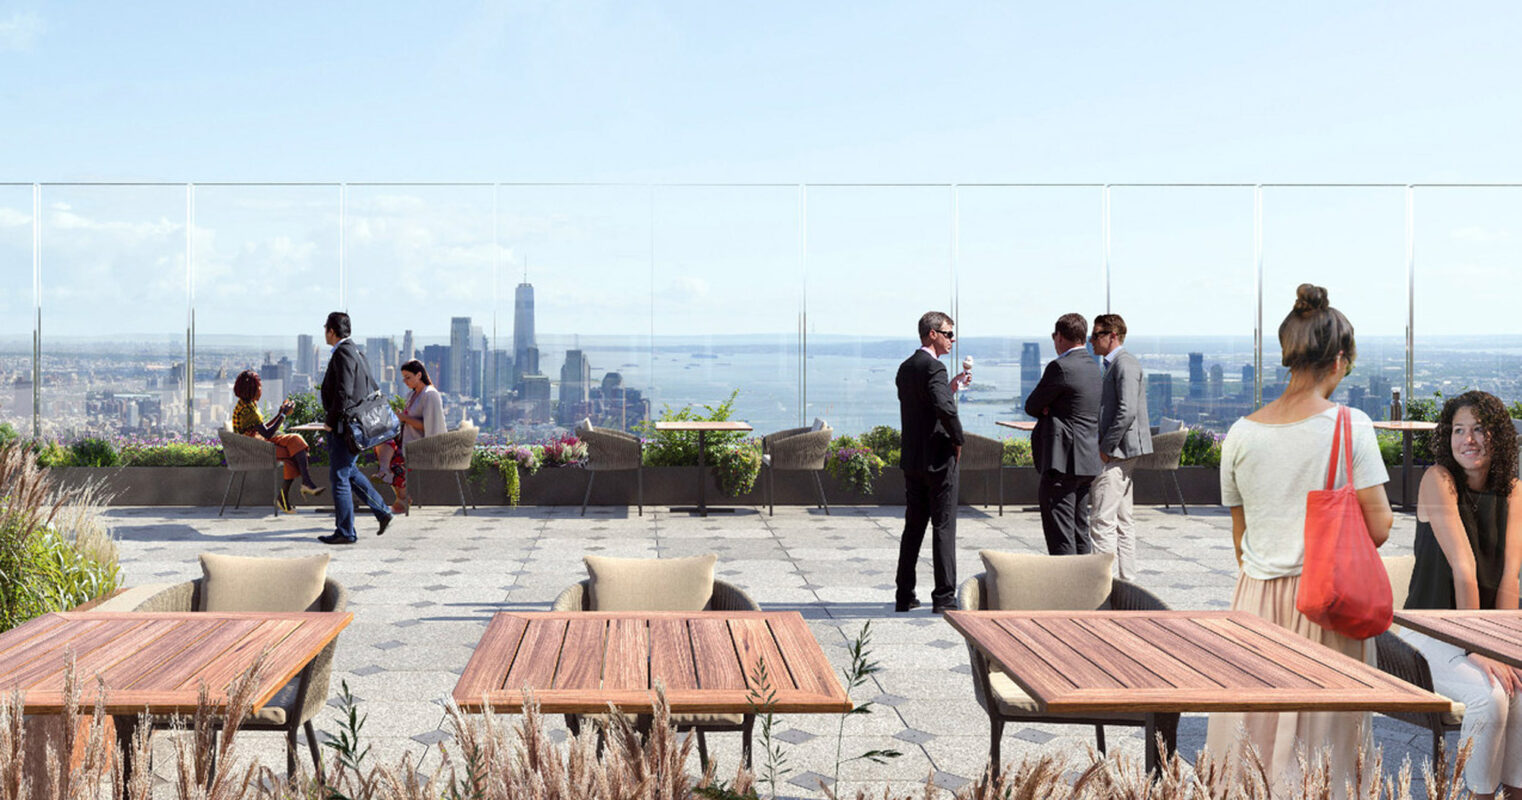 Rooftop patio space with minimalist wooden benches surrounded by flourishing wild grass. Transparent glass panels ensure uninterrupted views of the city skyline, facilitating an integrated experience between urban vistas and natural landscaping. People engage in conversation, adding lively human interaction to the serene setting.